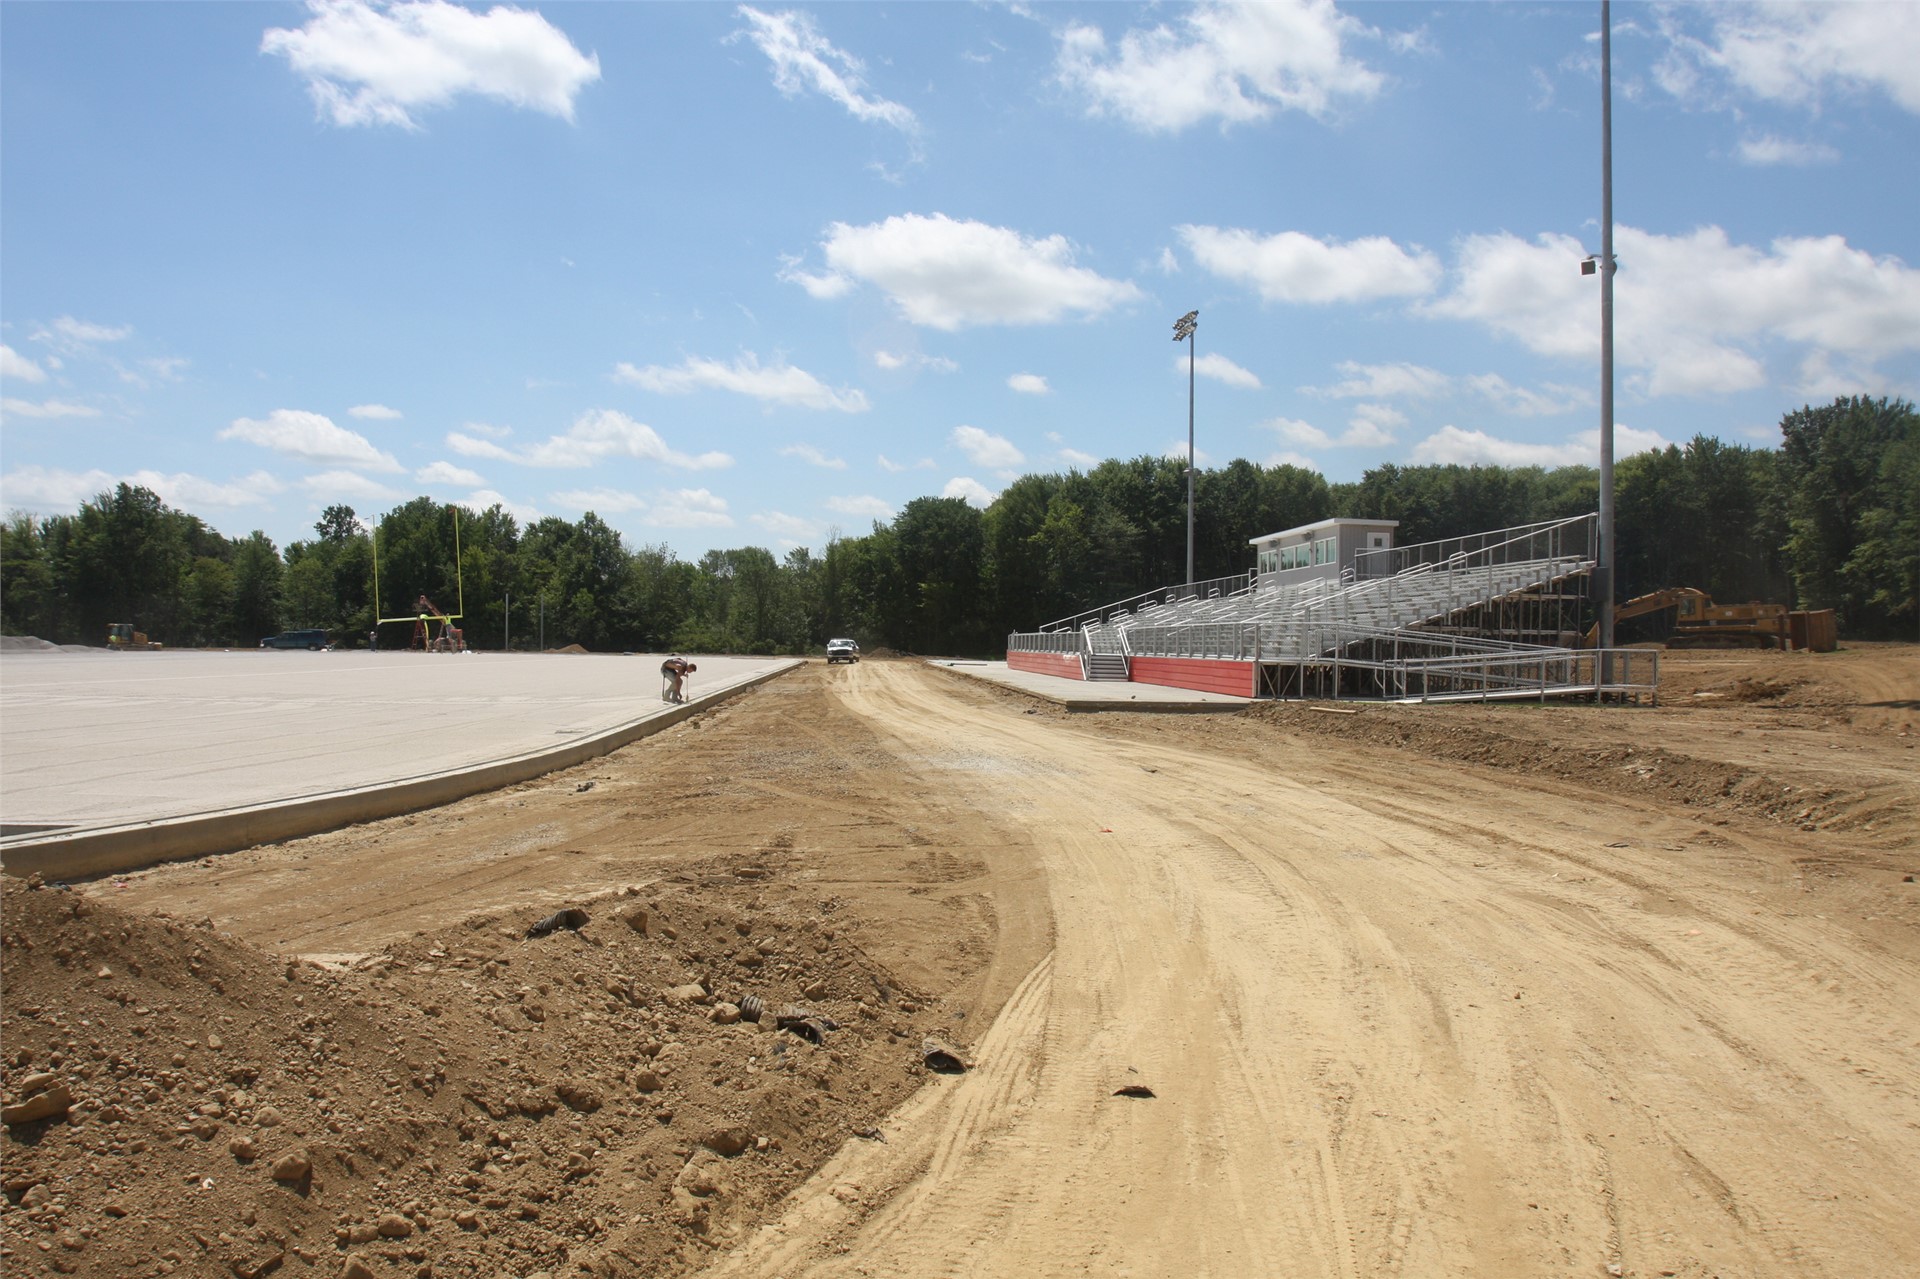 The field, track, and home stands